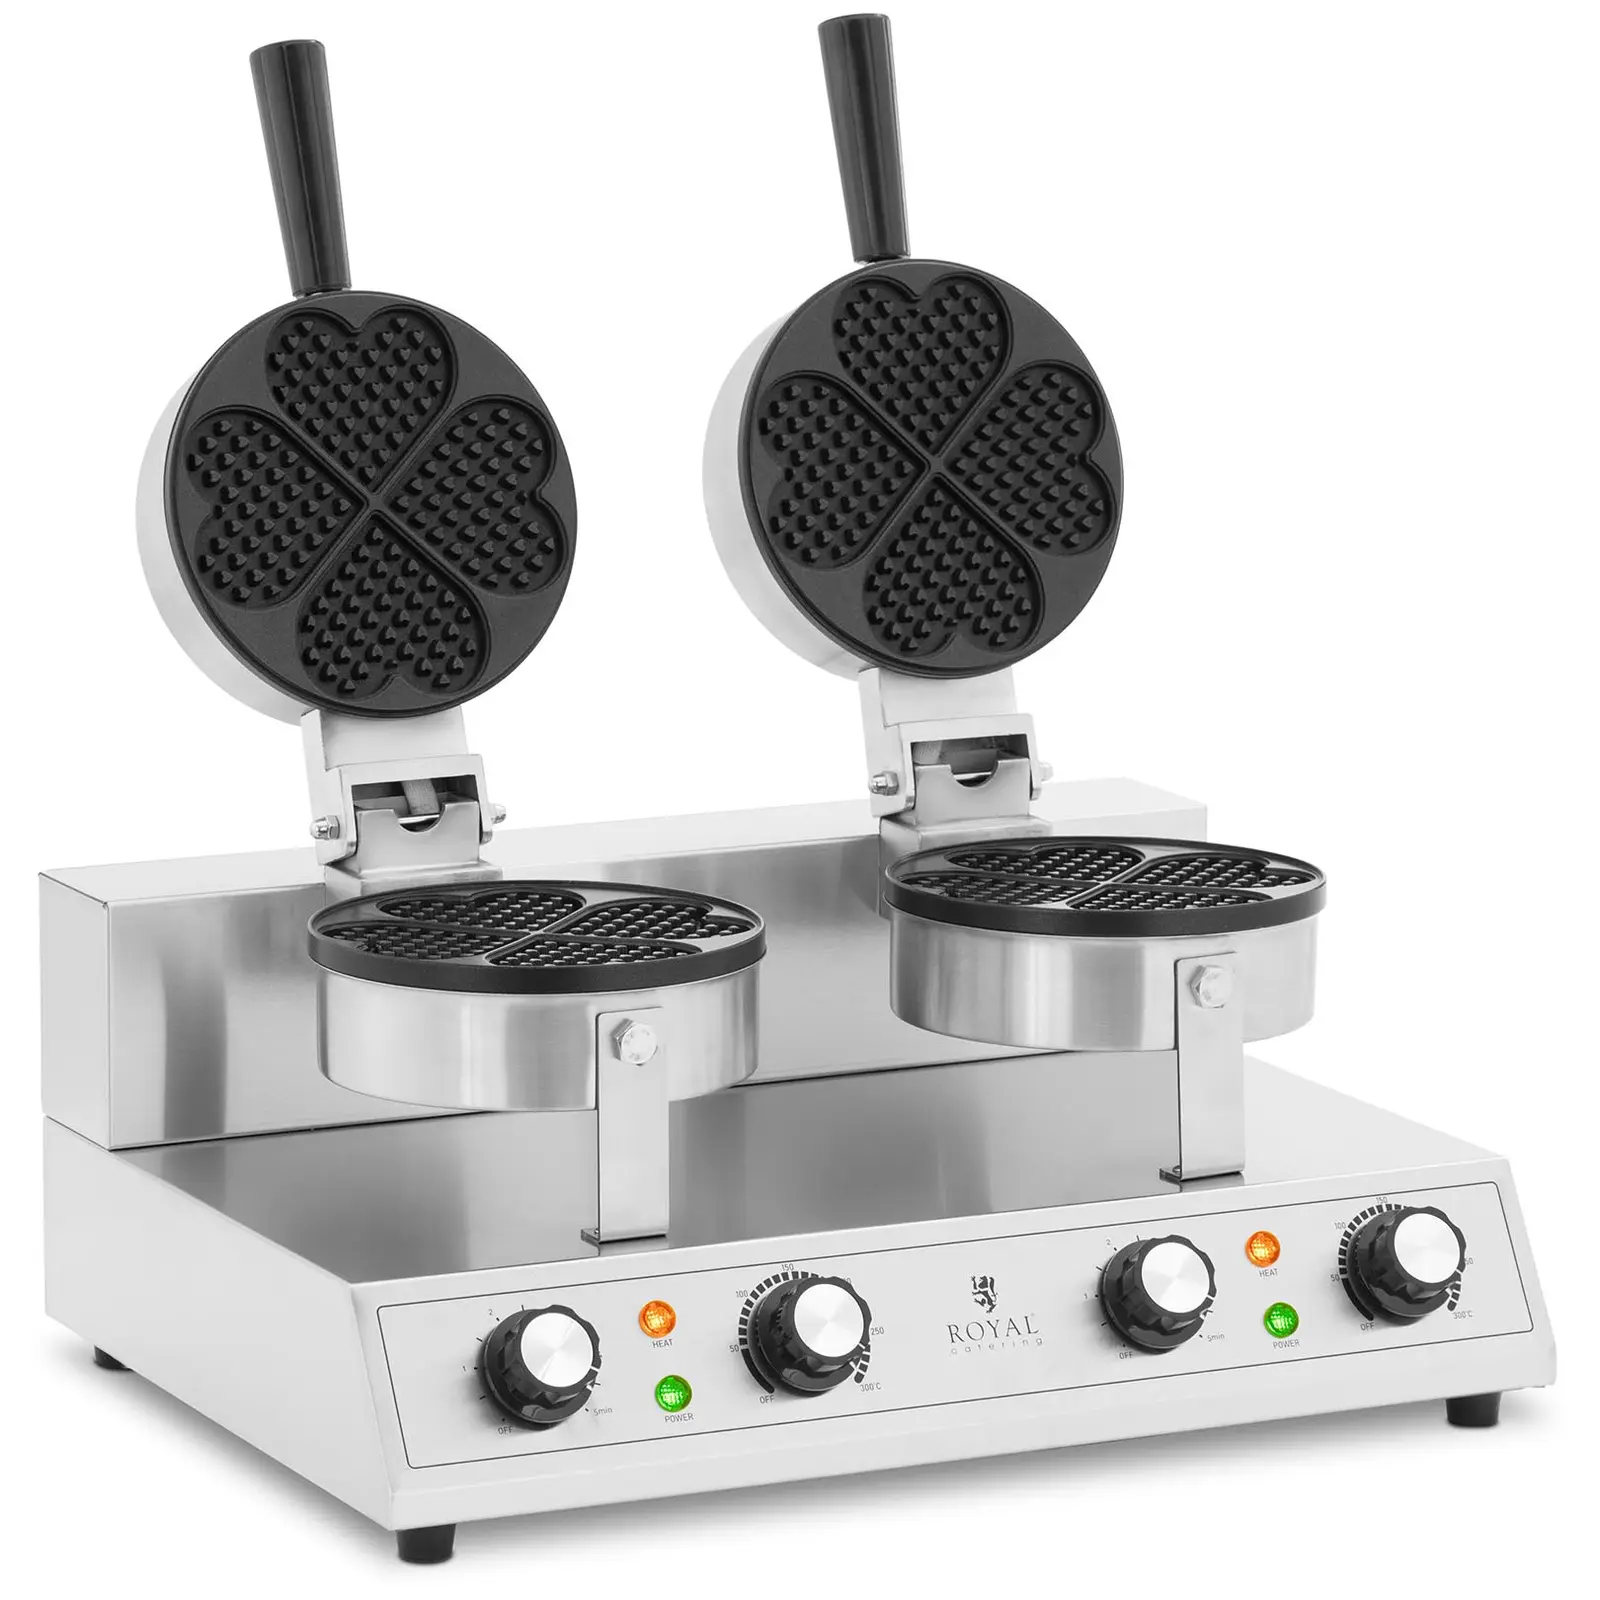 Piastra per waffles a cuore - 2 x 1000 W - Timer - Spessore waffles: 10 mm - Royal Catering